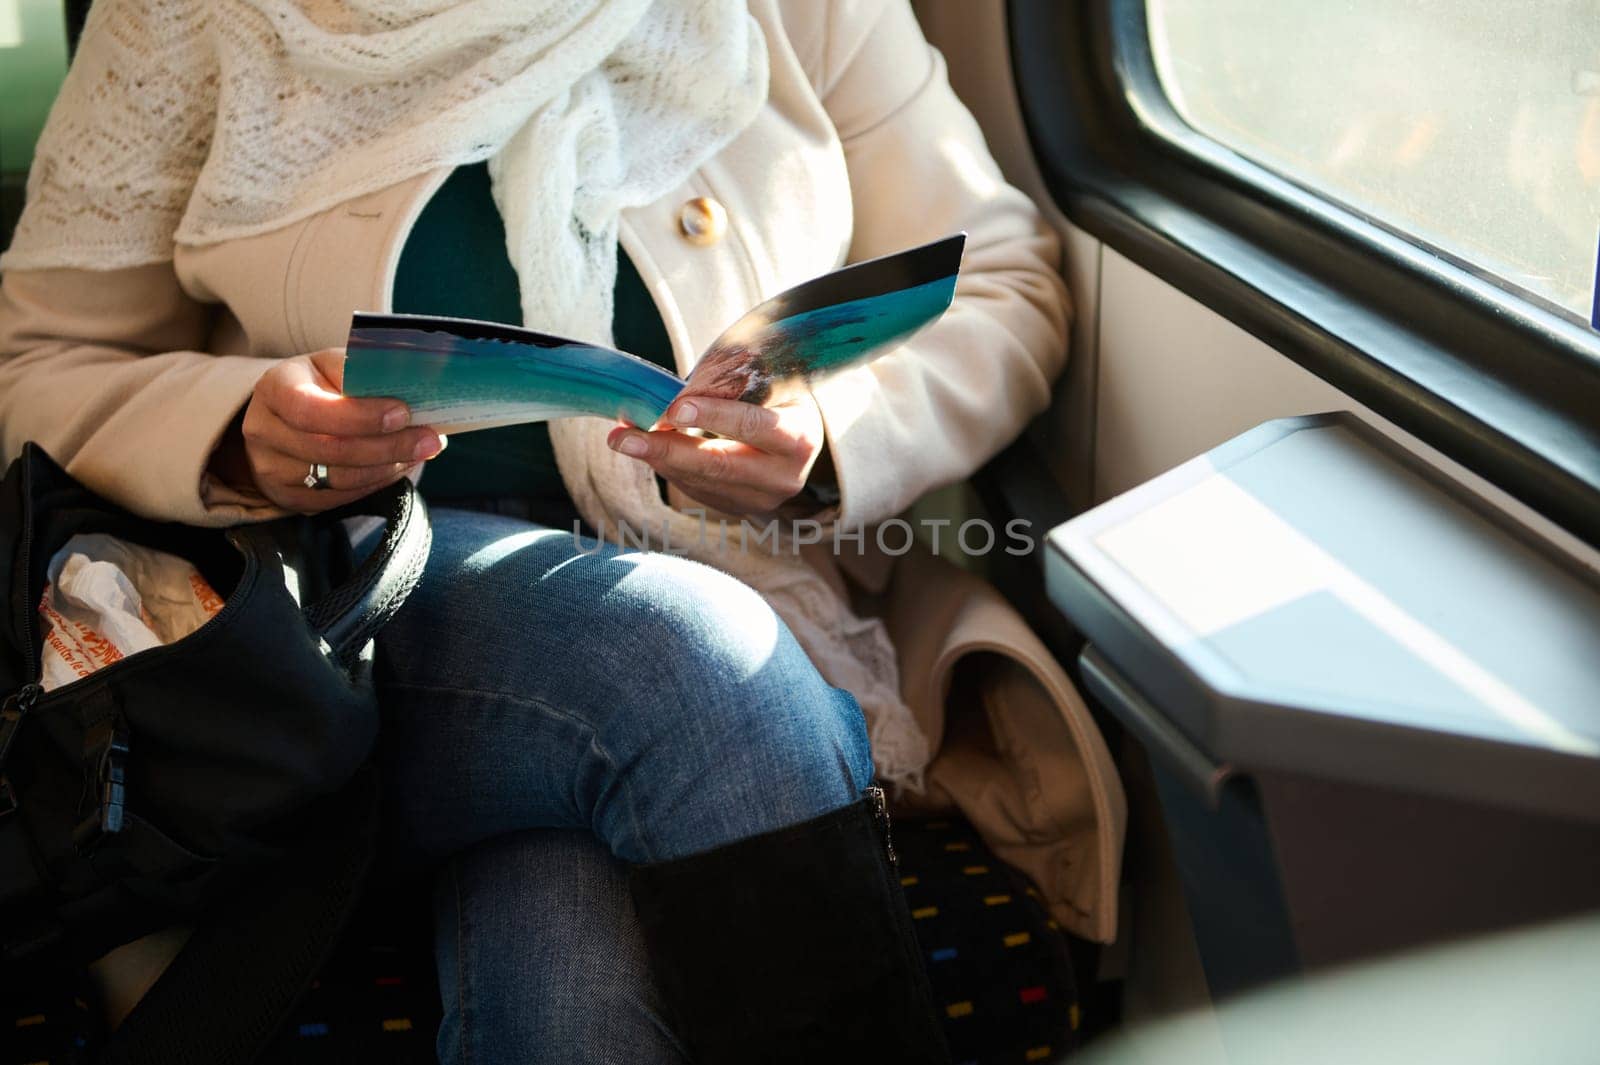 Close-up a leaflet in hands of a female commuter riding on a high speed train. people. Leisure. Rail road transportation by artgf